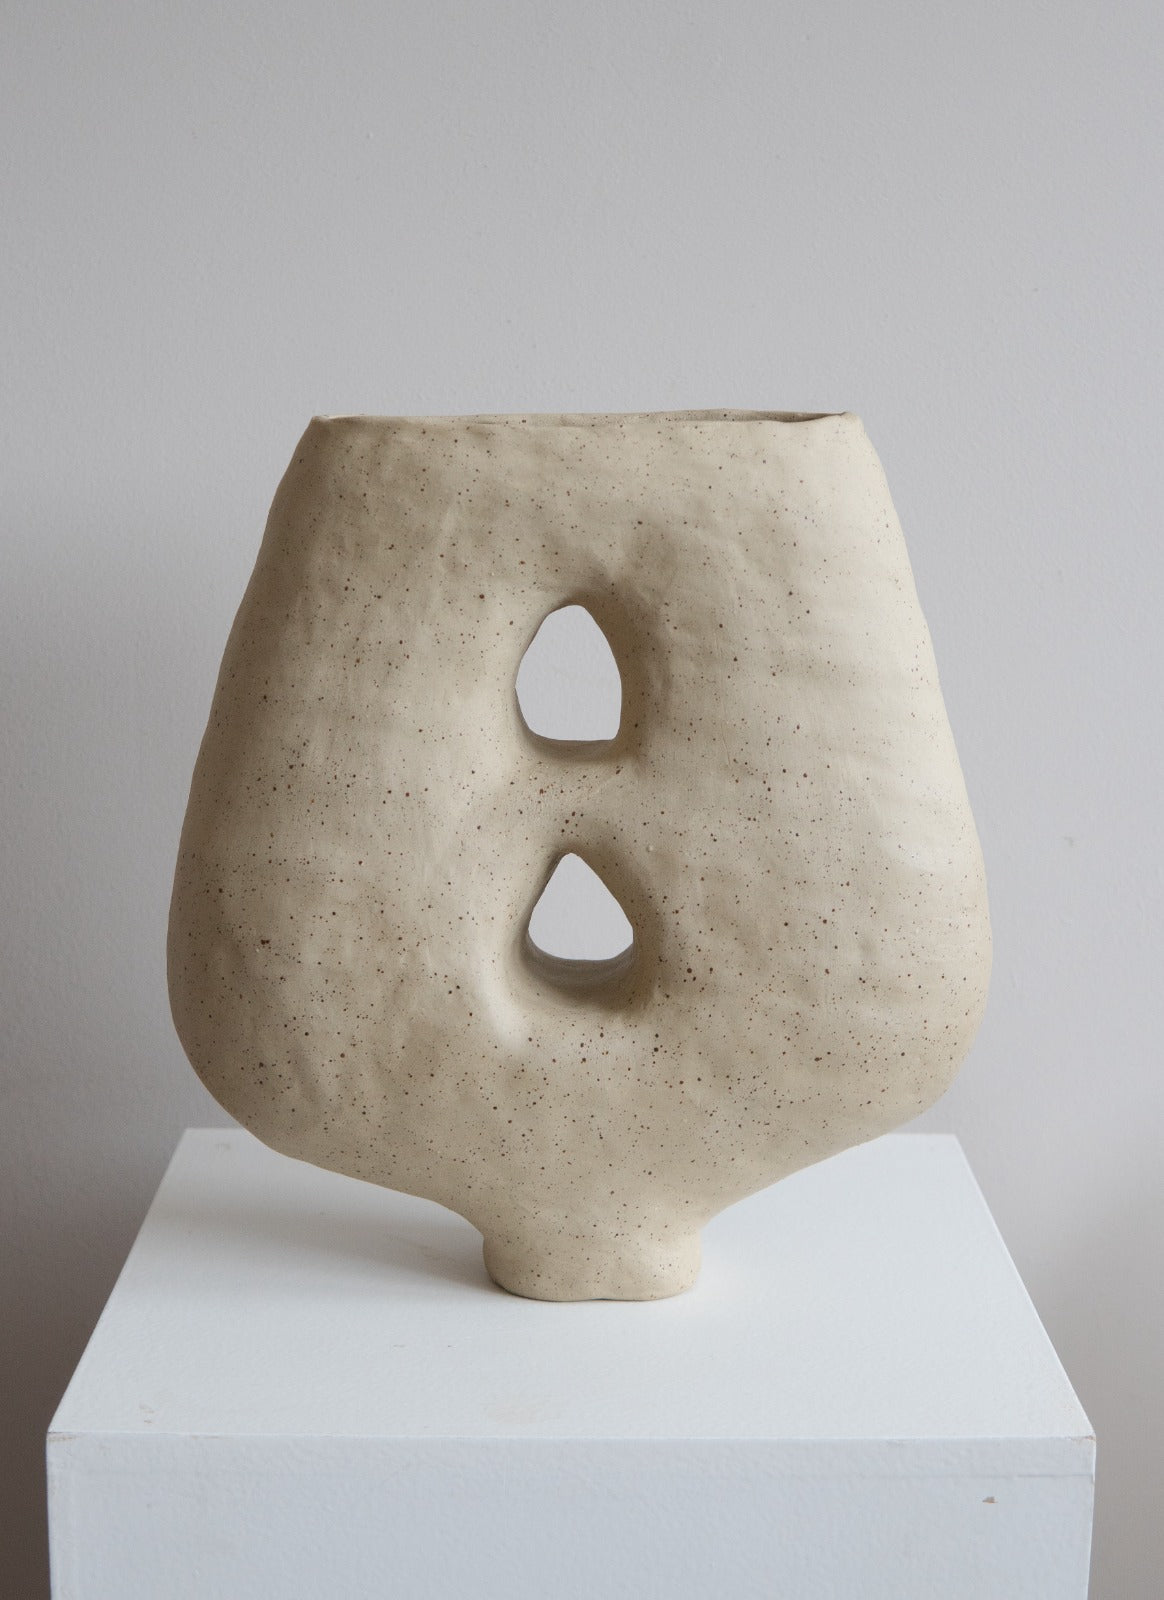 True A’s Vase - speckled stoneware